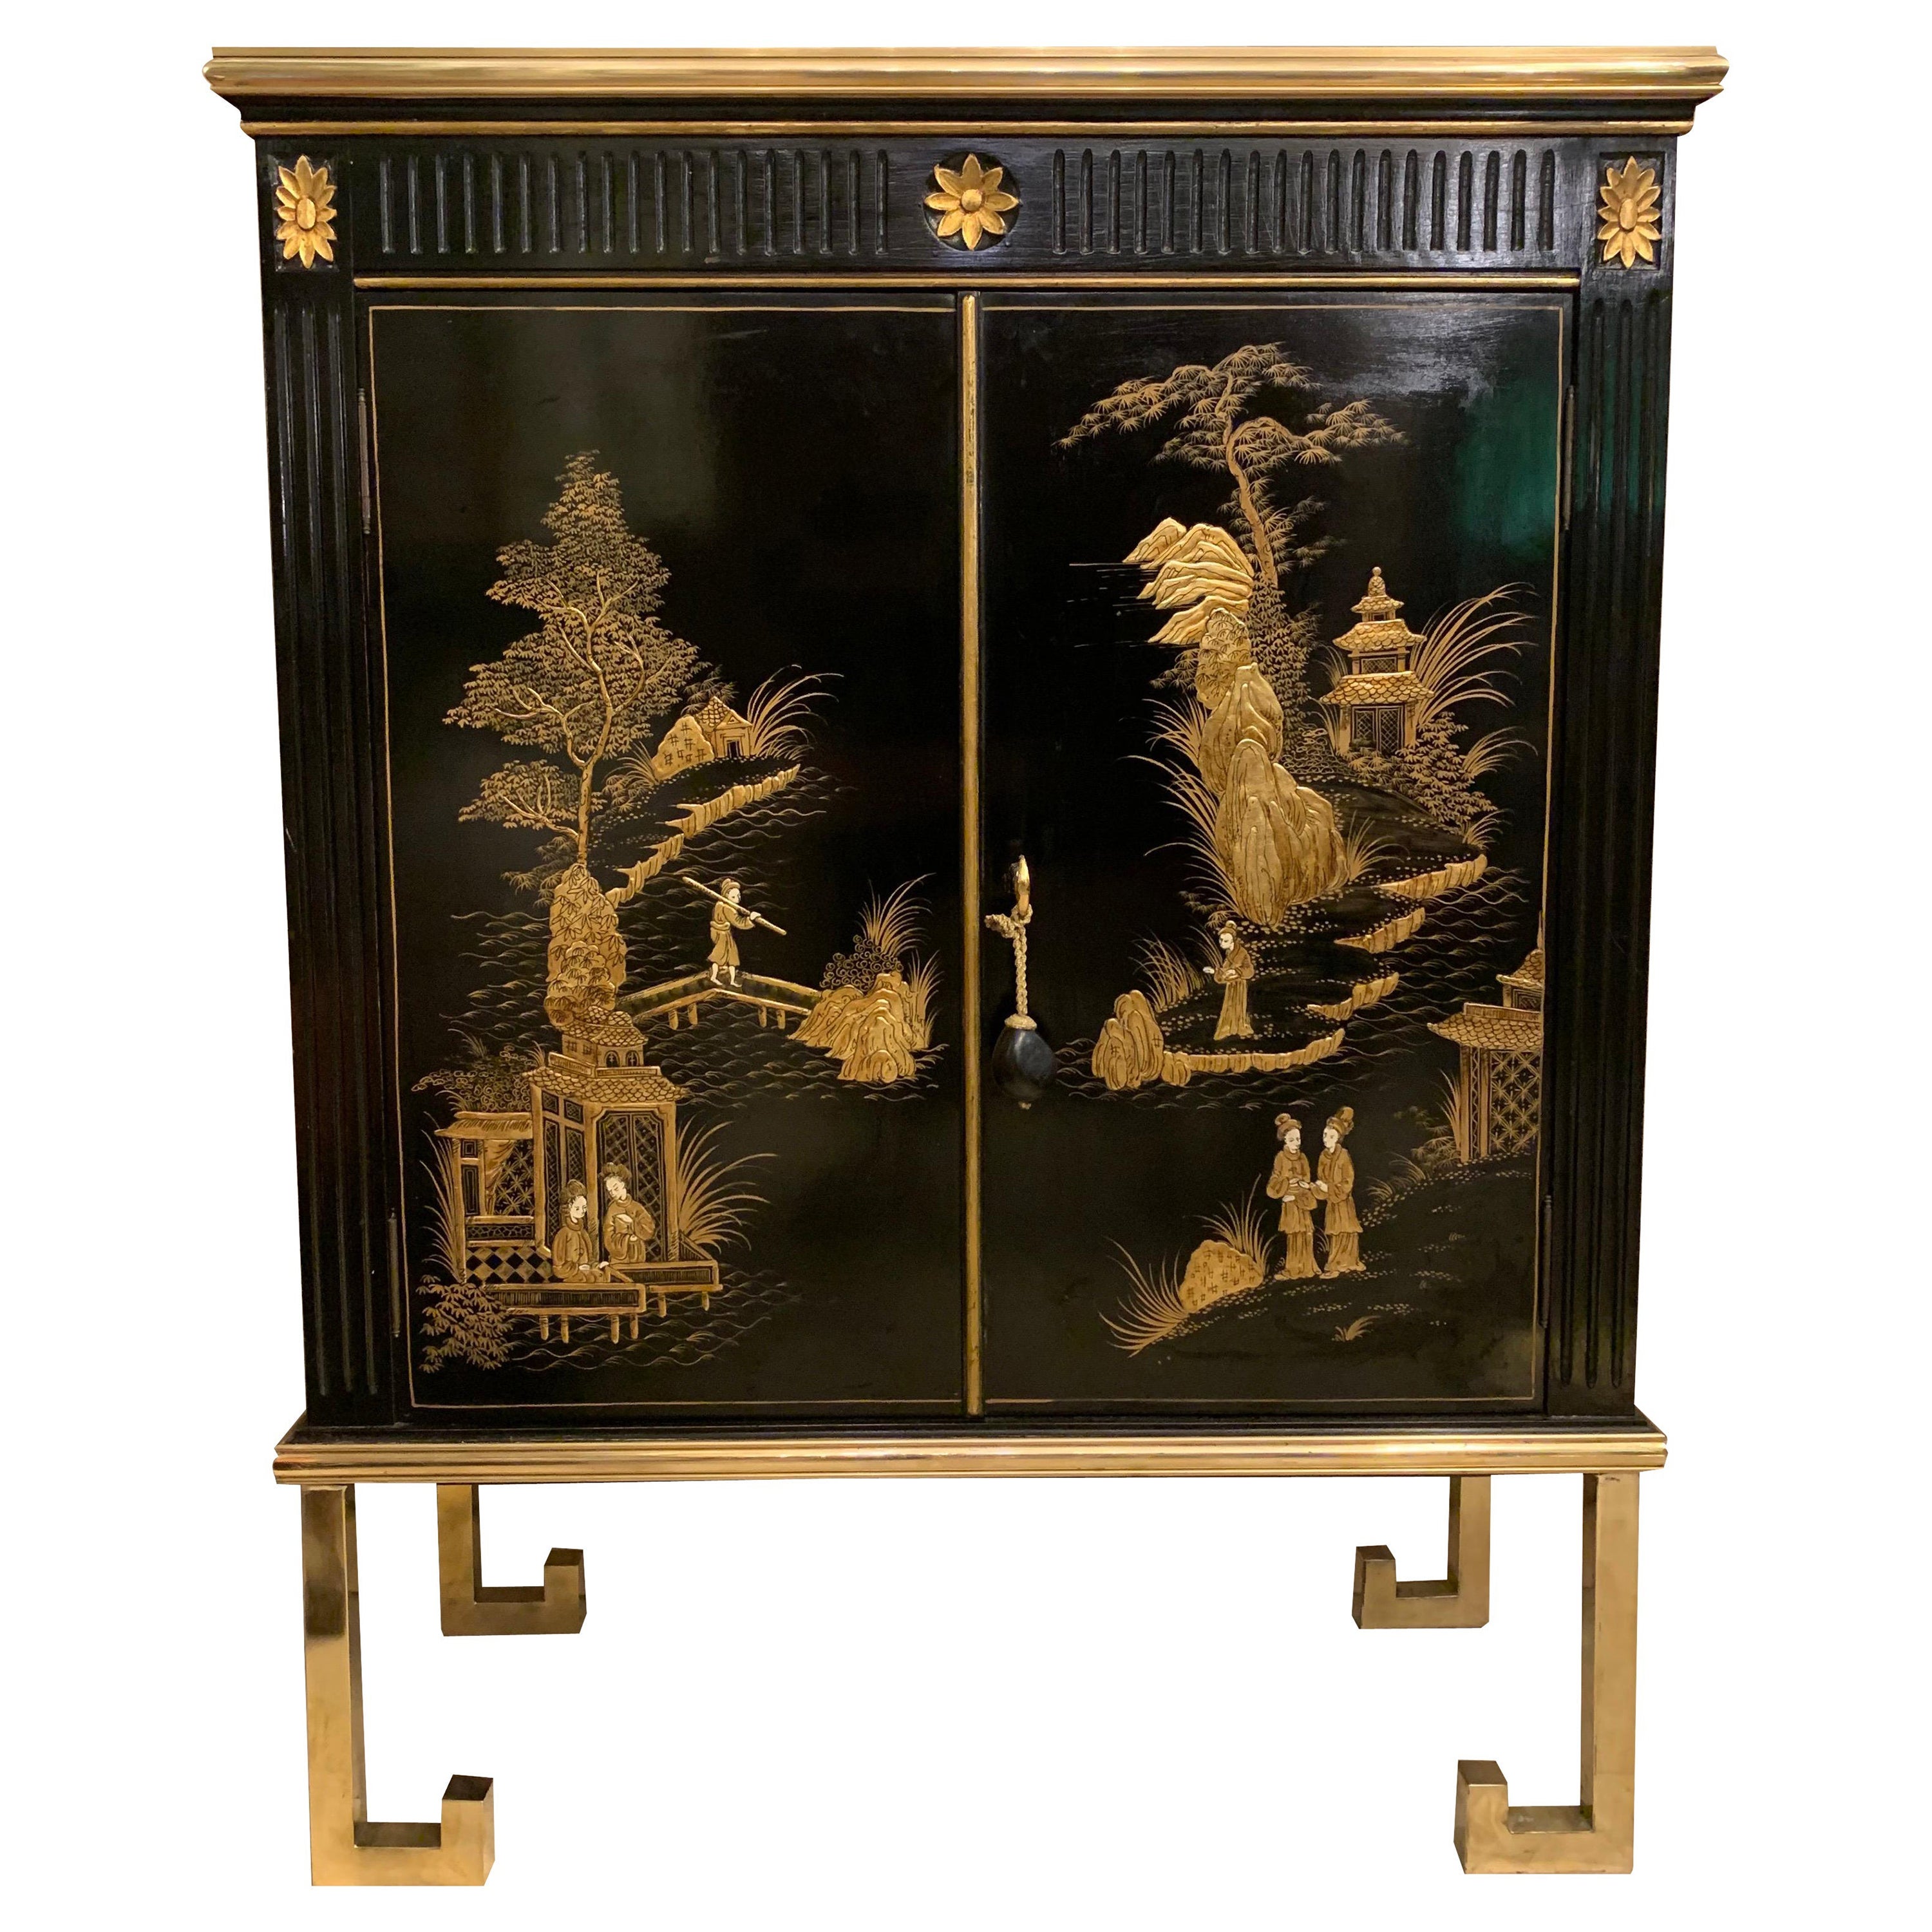 Black Lacquered Chinese Cabinet with Gilt Hand Painted Motifs, Early 1900